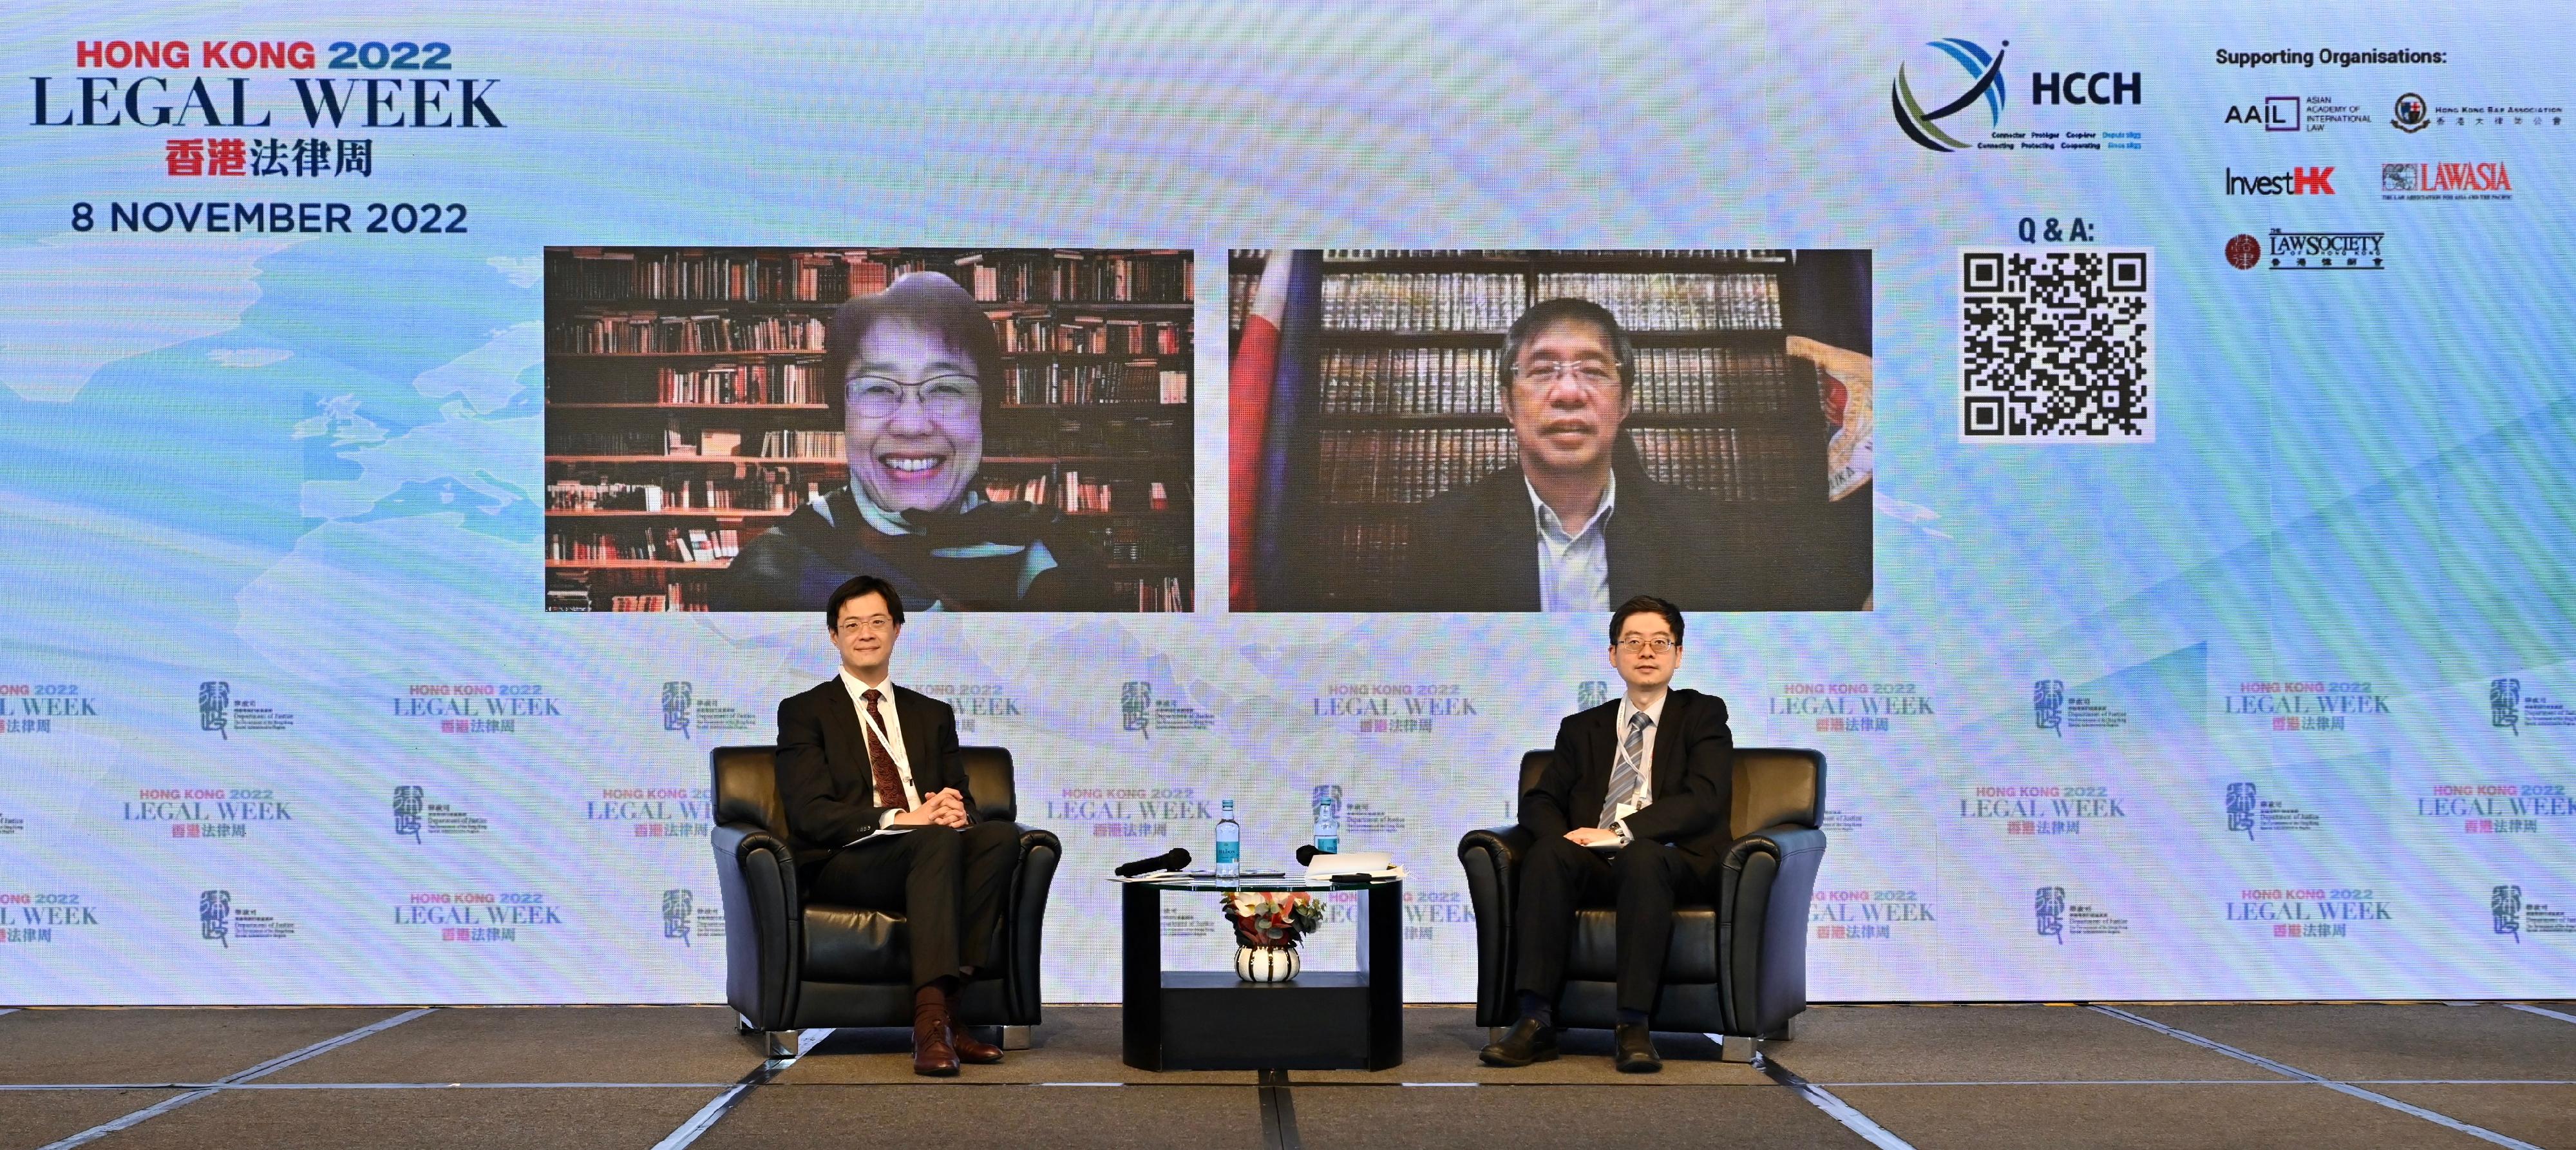 The five-day Hong Kong Legal Week 2022, an annual flagship event of the Department of Justice, continued today (November 8). Photo shows Law Officer (International Law) of the Department of Justice Dr James Ding (right); Deputy Secretary General of the Asian Academy of International Law, Mr Adrian Lai (left); Court Administrator of the Office of the Court Administrator of the Supreme Court of the Philippines, Mr Raul Bautista Villanueva (right on screen); and Professor of Private International Law at Kyoto University, Professor Yuko Nishitani (left on screen), at panel 1 on Co-operation as a Means to Support Transnational Litigation at Hague Conference on Private International Law Conventions Supporting Transnational Litigation in Civil or Commercial Matters: A Workshop to celebrate the Tenth Anniversary of the Regional Office for Asia and the Pacific.